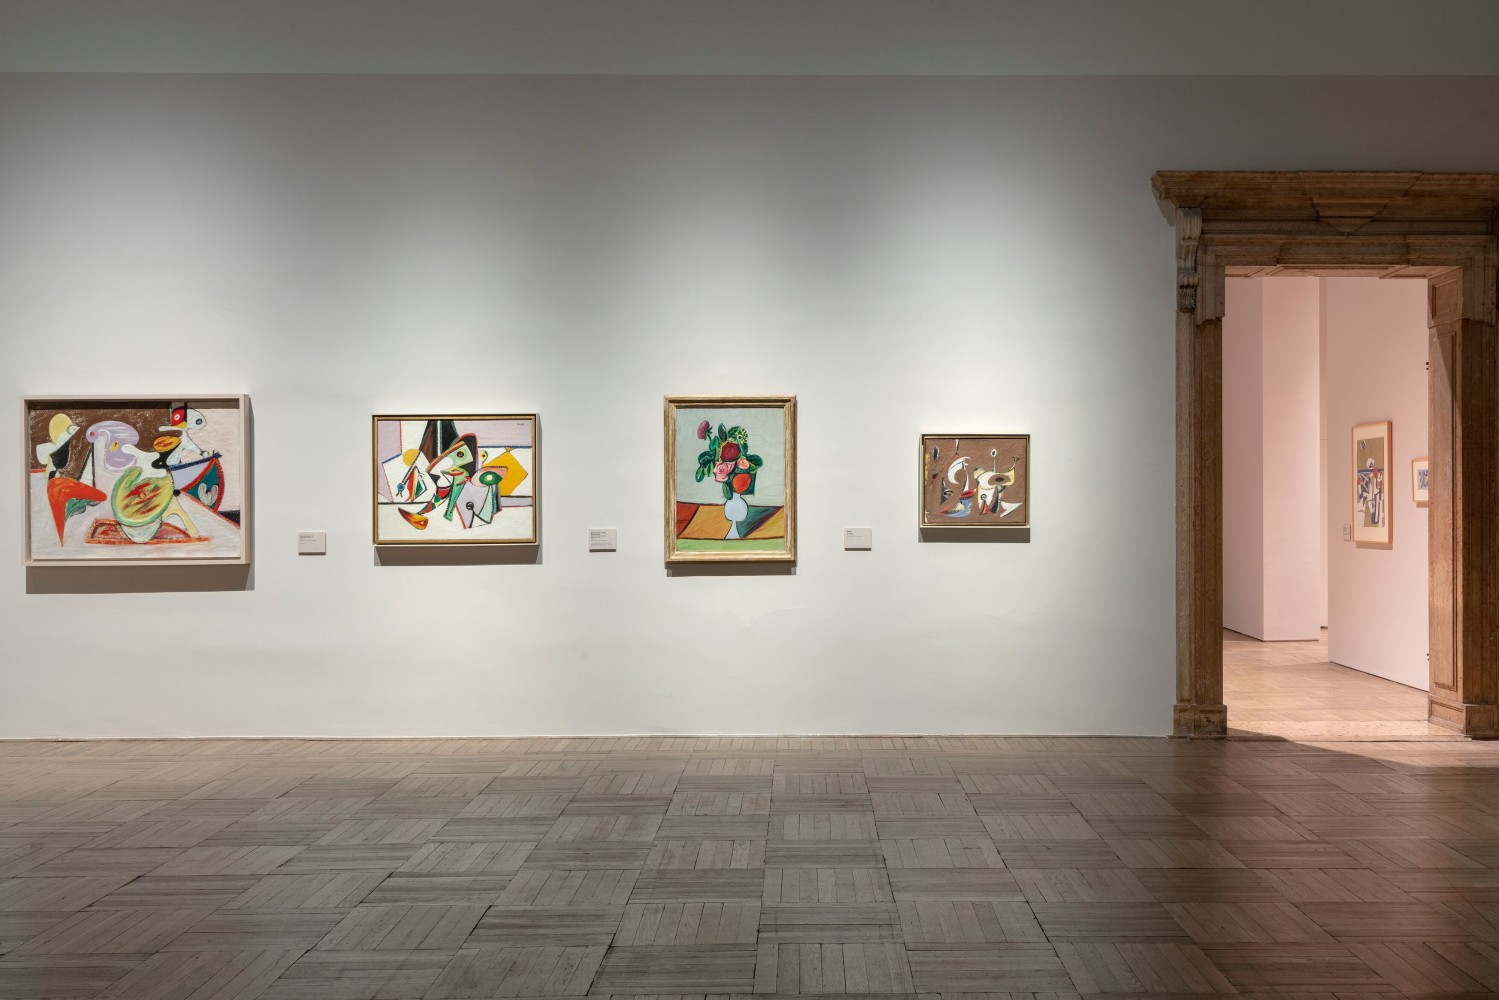 Installation photograph showing paintings by Gorky from the mid to late 1930s